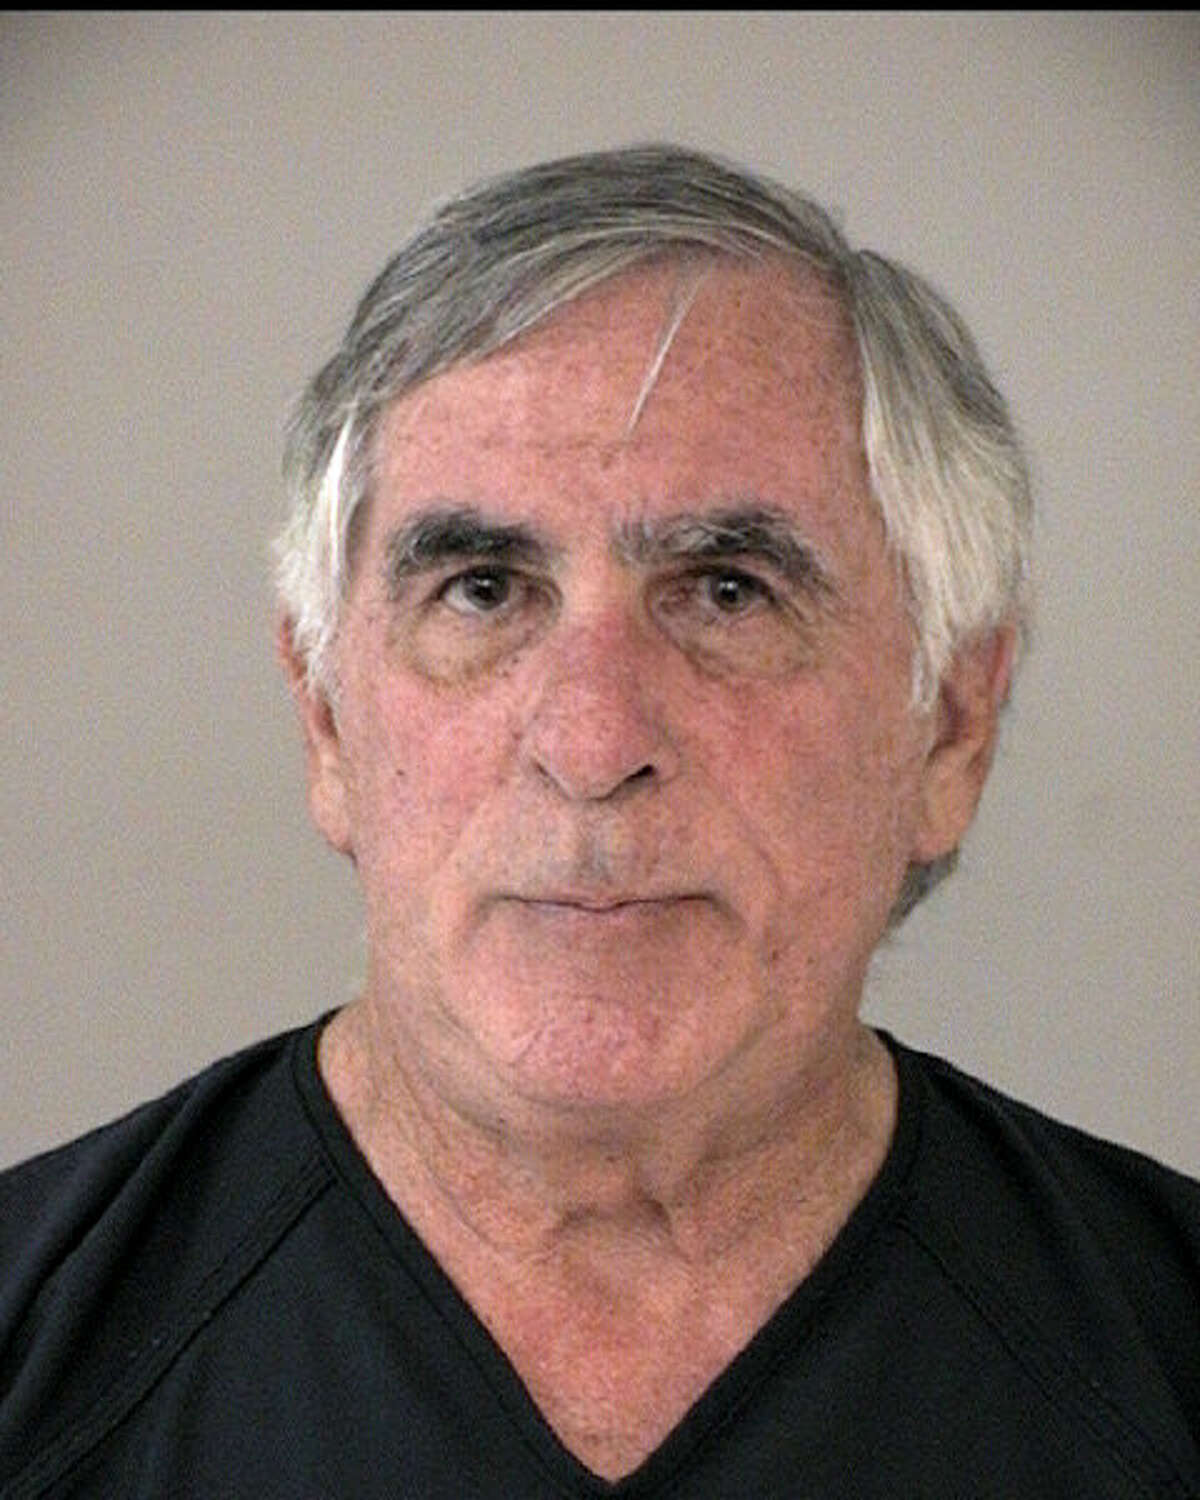 John L. Eells, 70, is accused of aggravated assault on a police officer and driving while intoxicated in Fort Bend County.